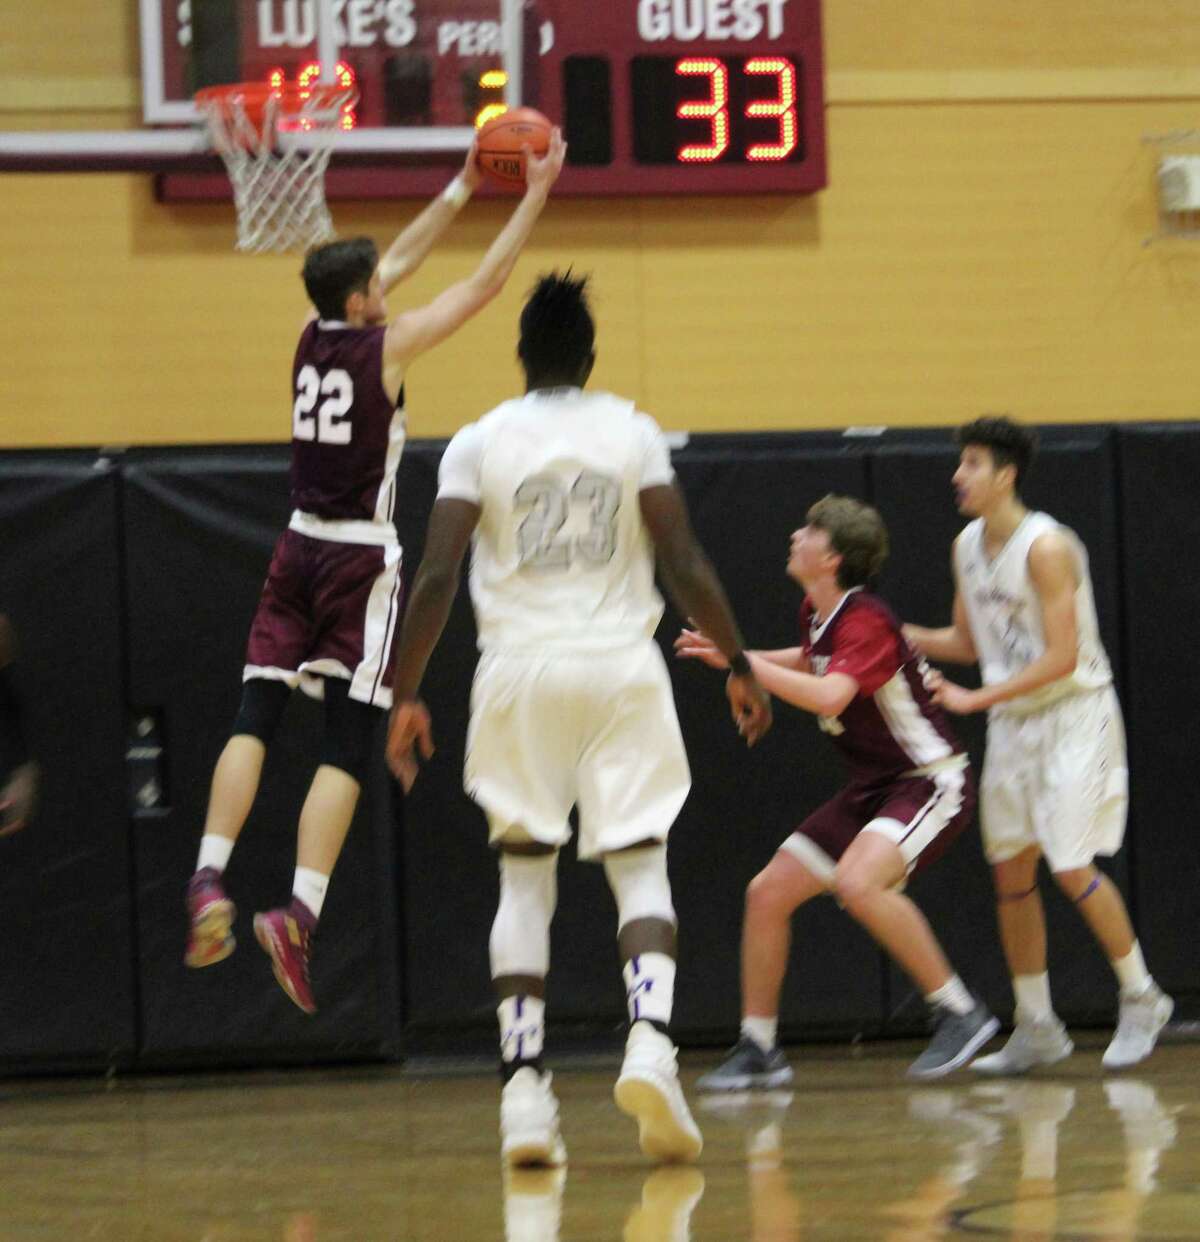 St. Luke's Scott Vollmer extends for a rebound during an FAA boys basketball game between St. Luke's and Masters (NY) at St. Luke's in New Canaan, Conn. St. Luke's defeated Masters 71-60.